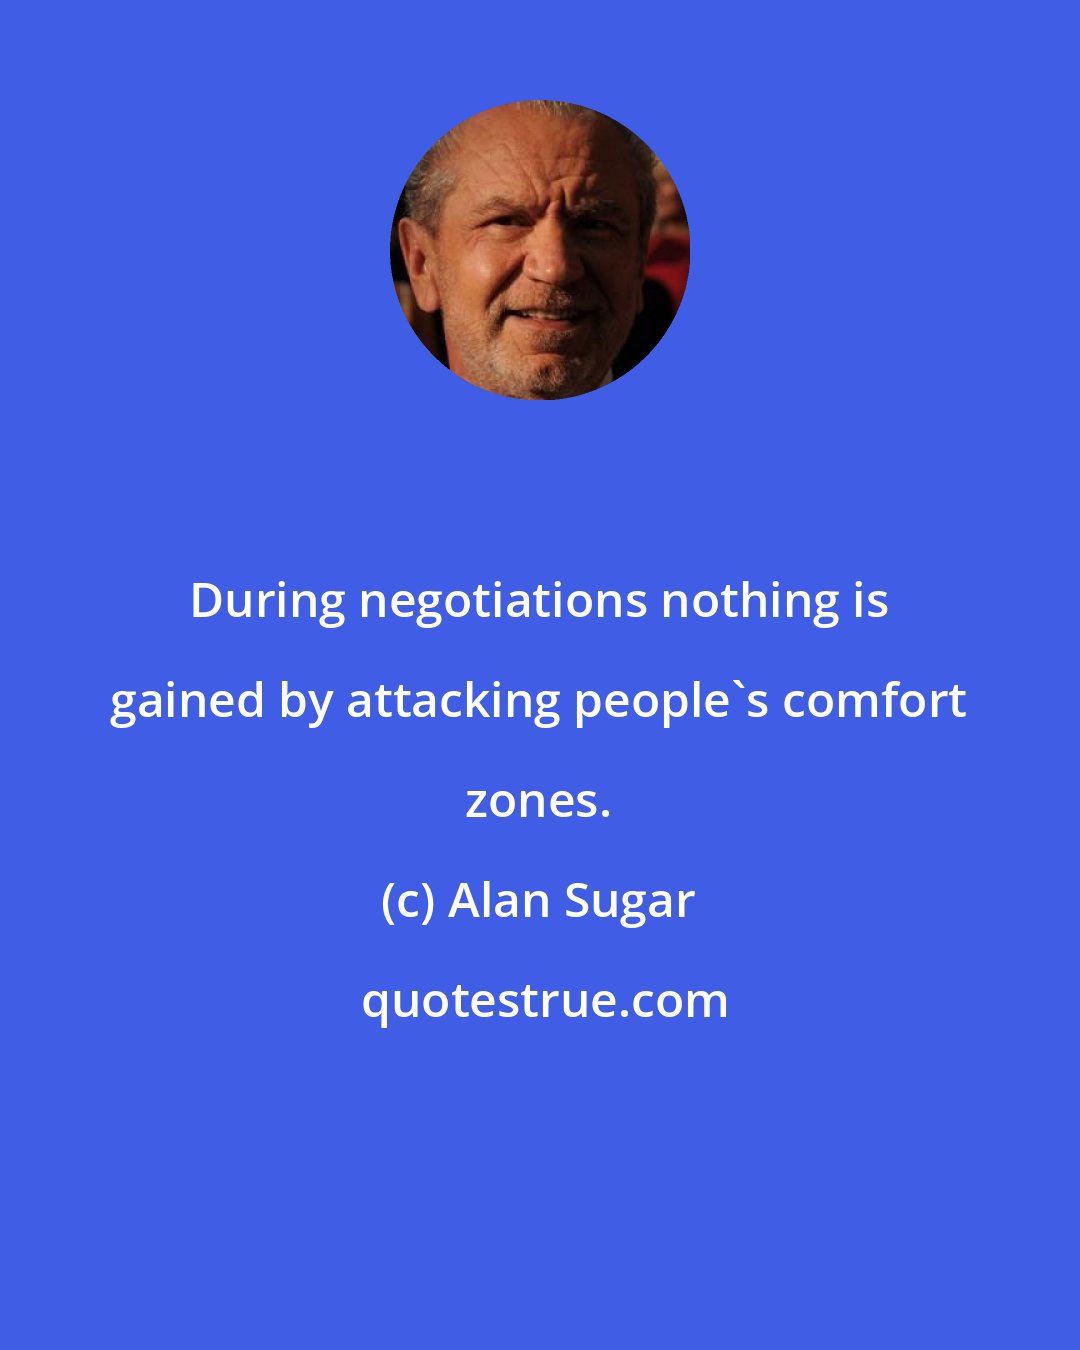 Alan Sugar: During negotiations nothing is gained by attacking people's comfort zones.